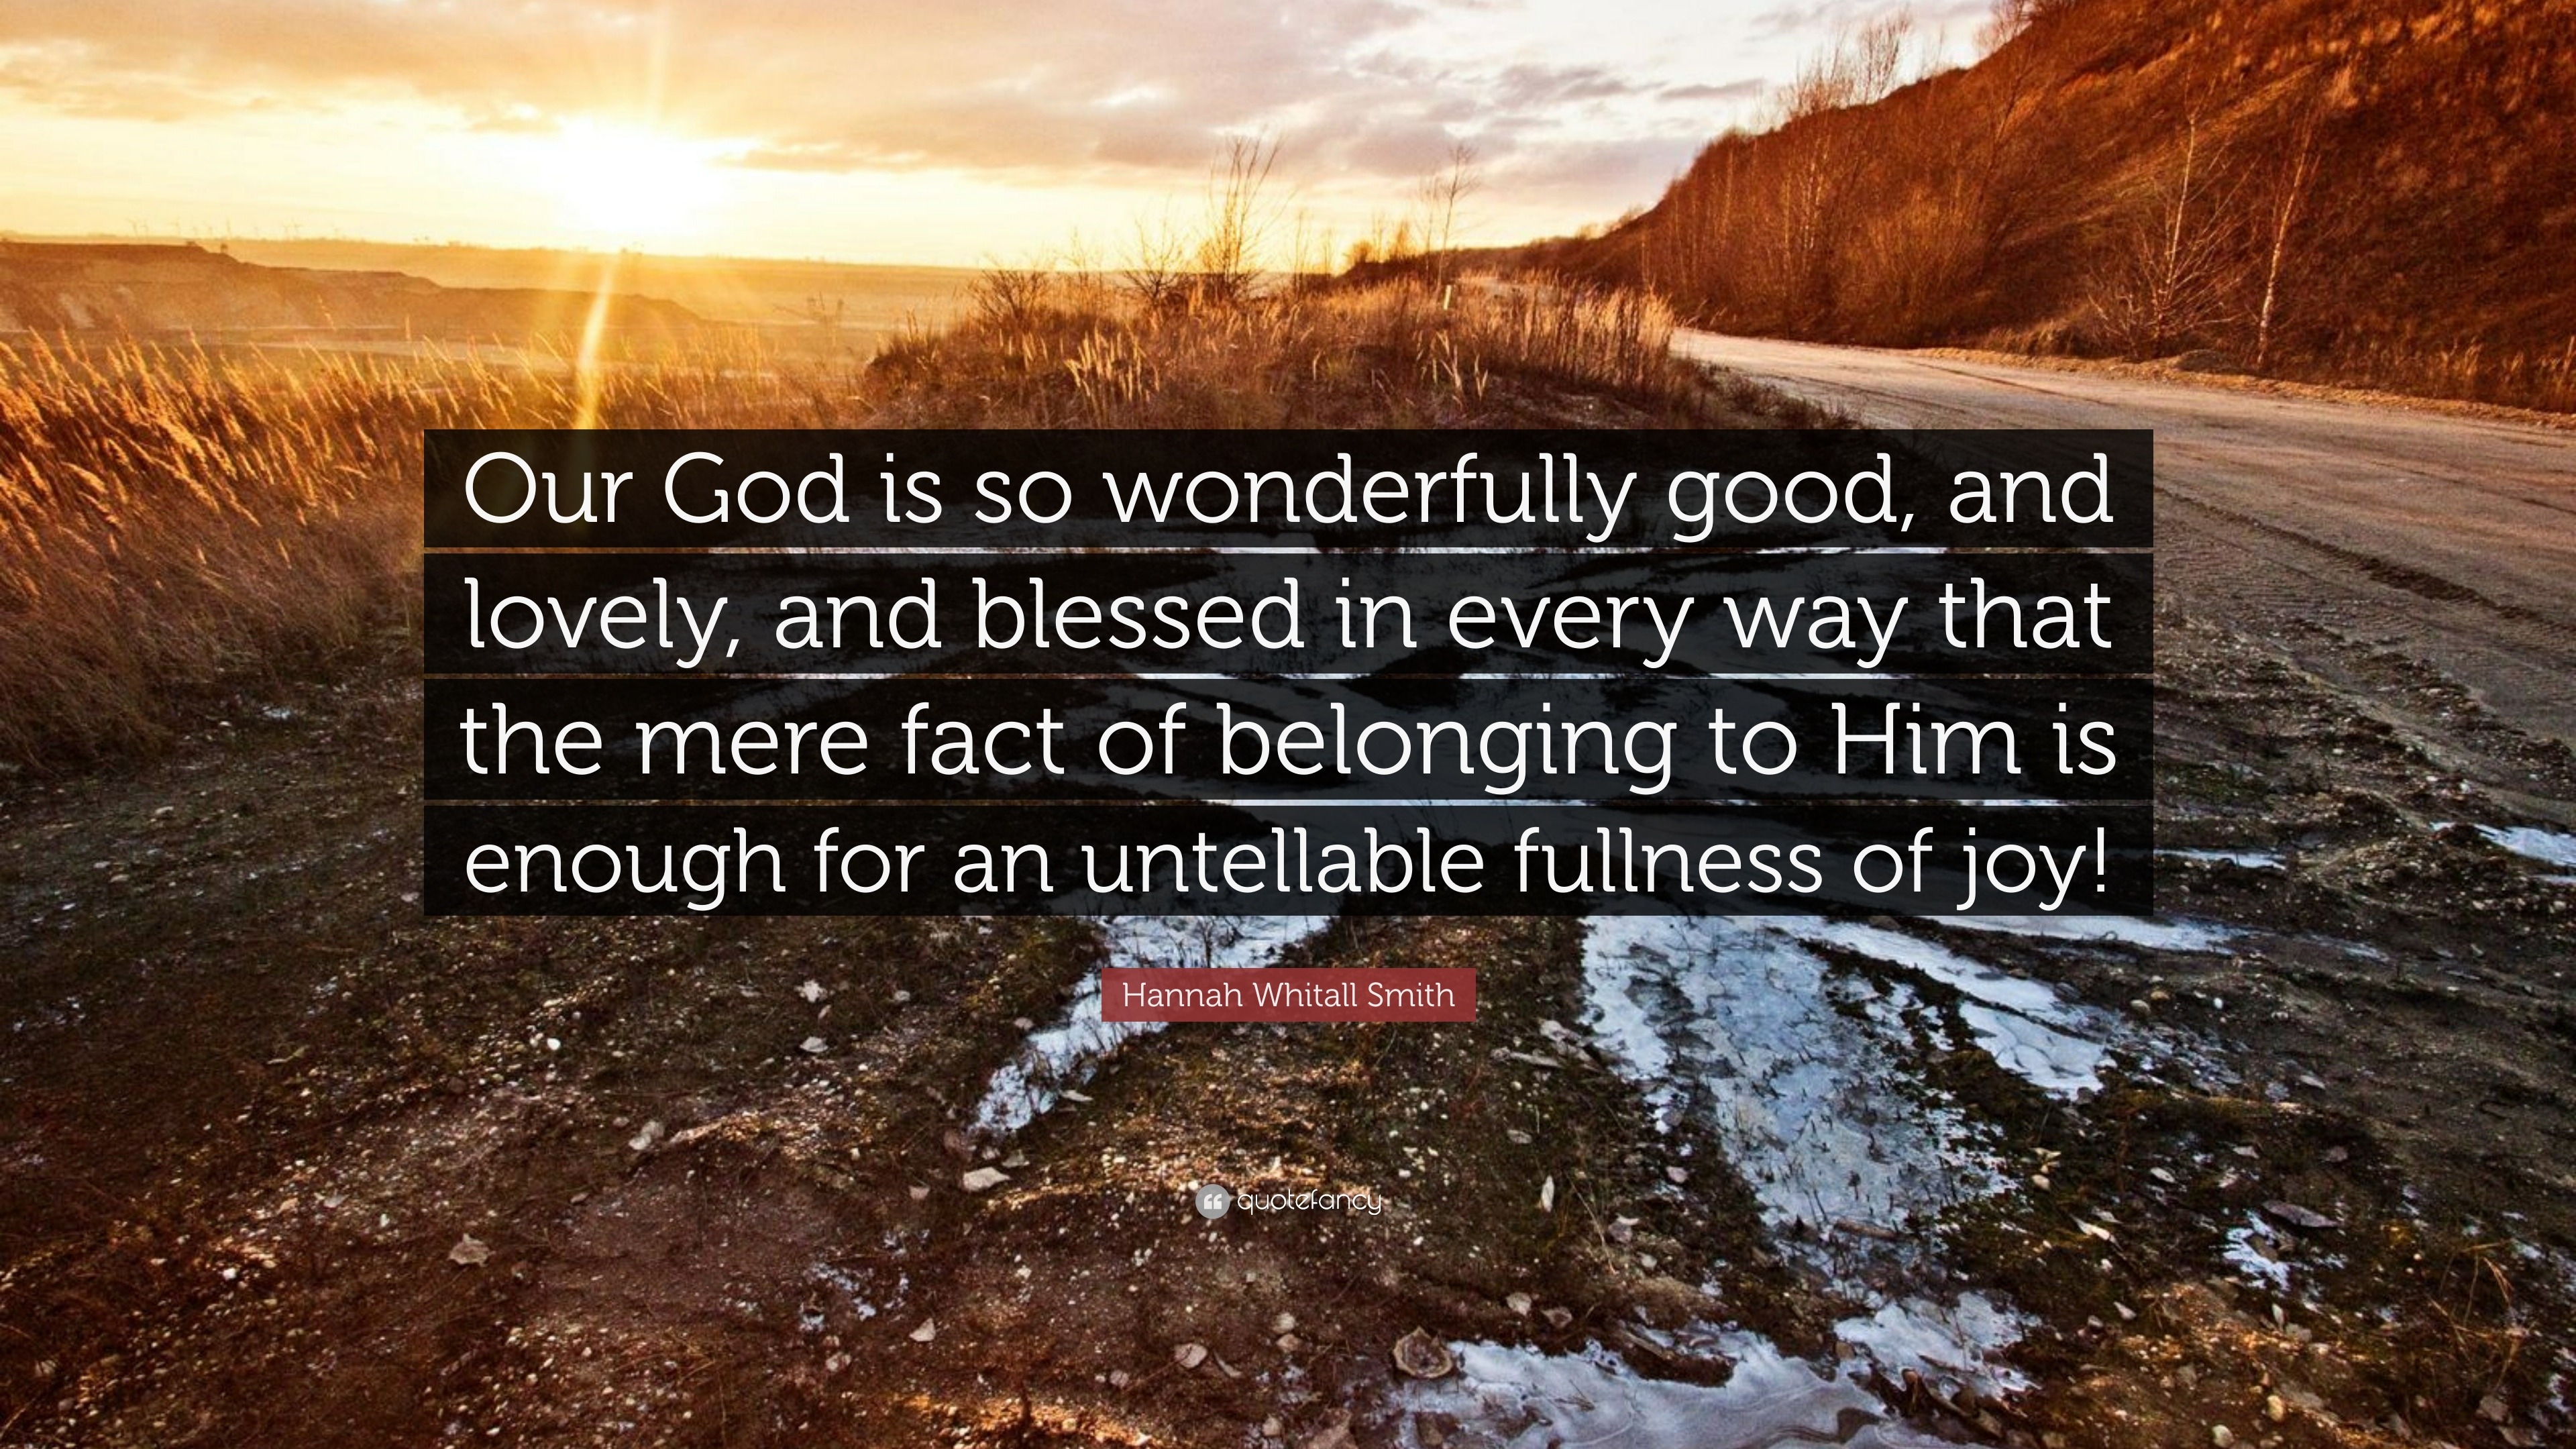 Hannah Whitall Smith Quote: “Our God is so wonderfully good, and lovely ...